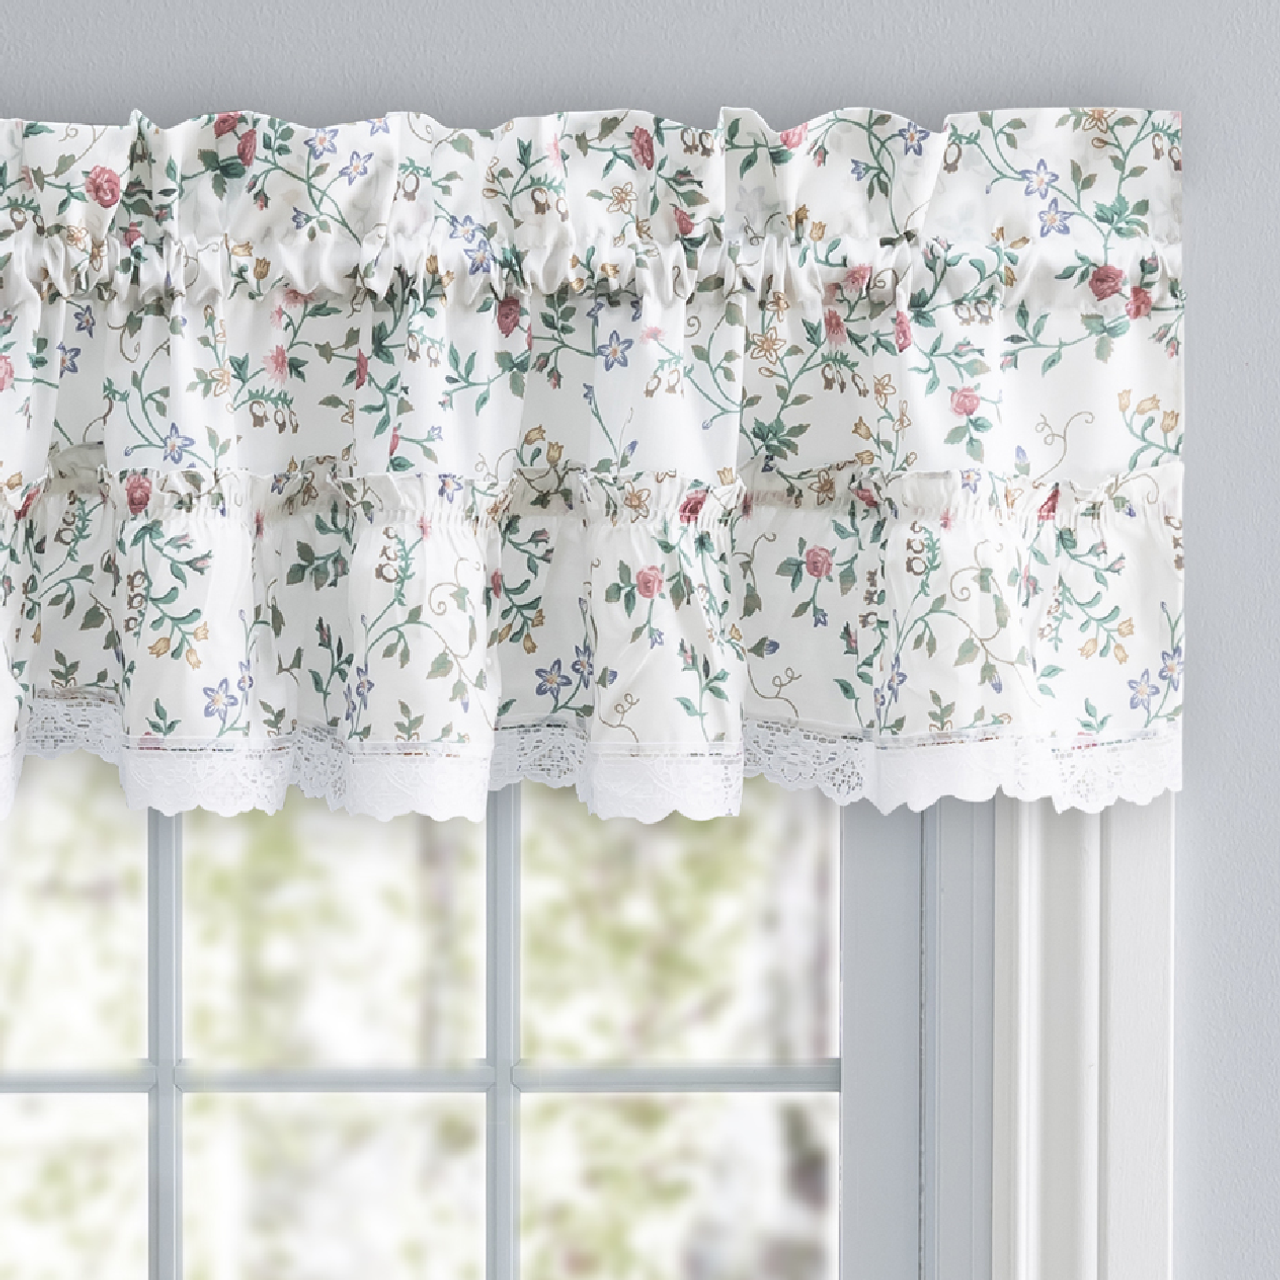 COUNTRY FLORAL - RUFFLED VALANCE